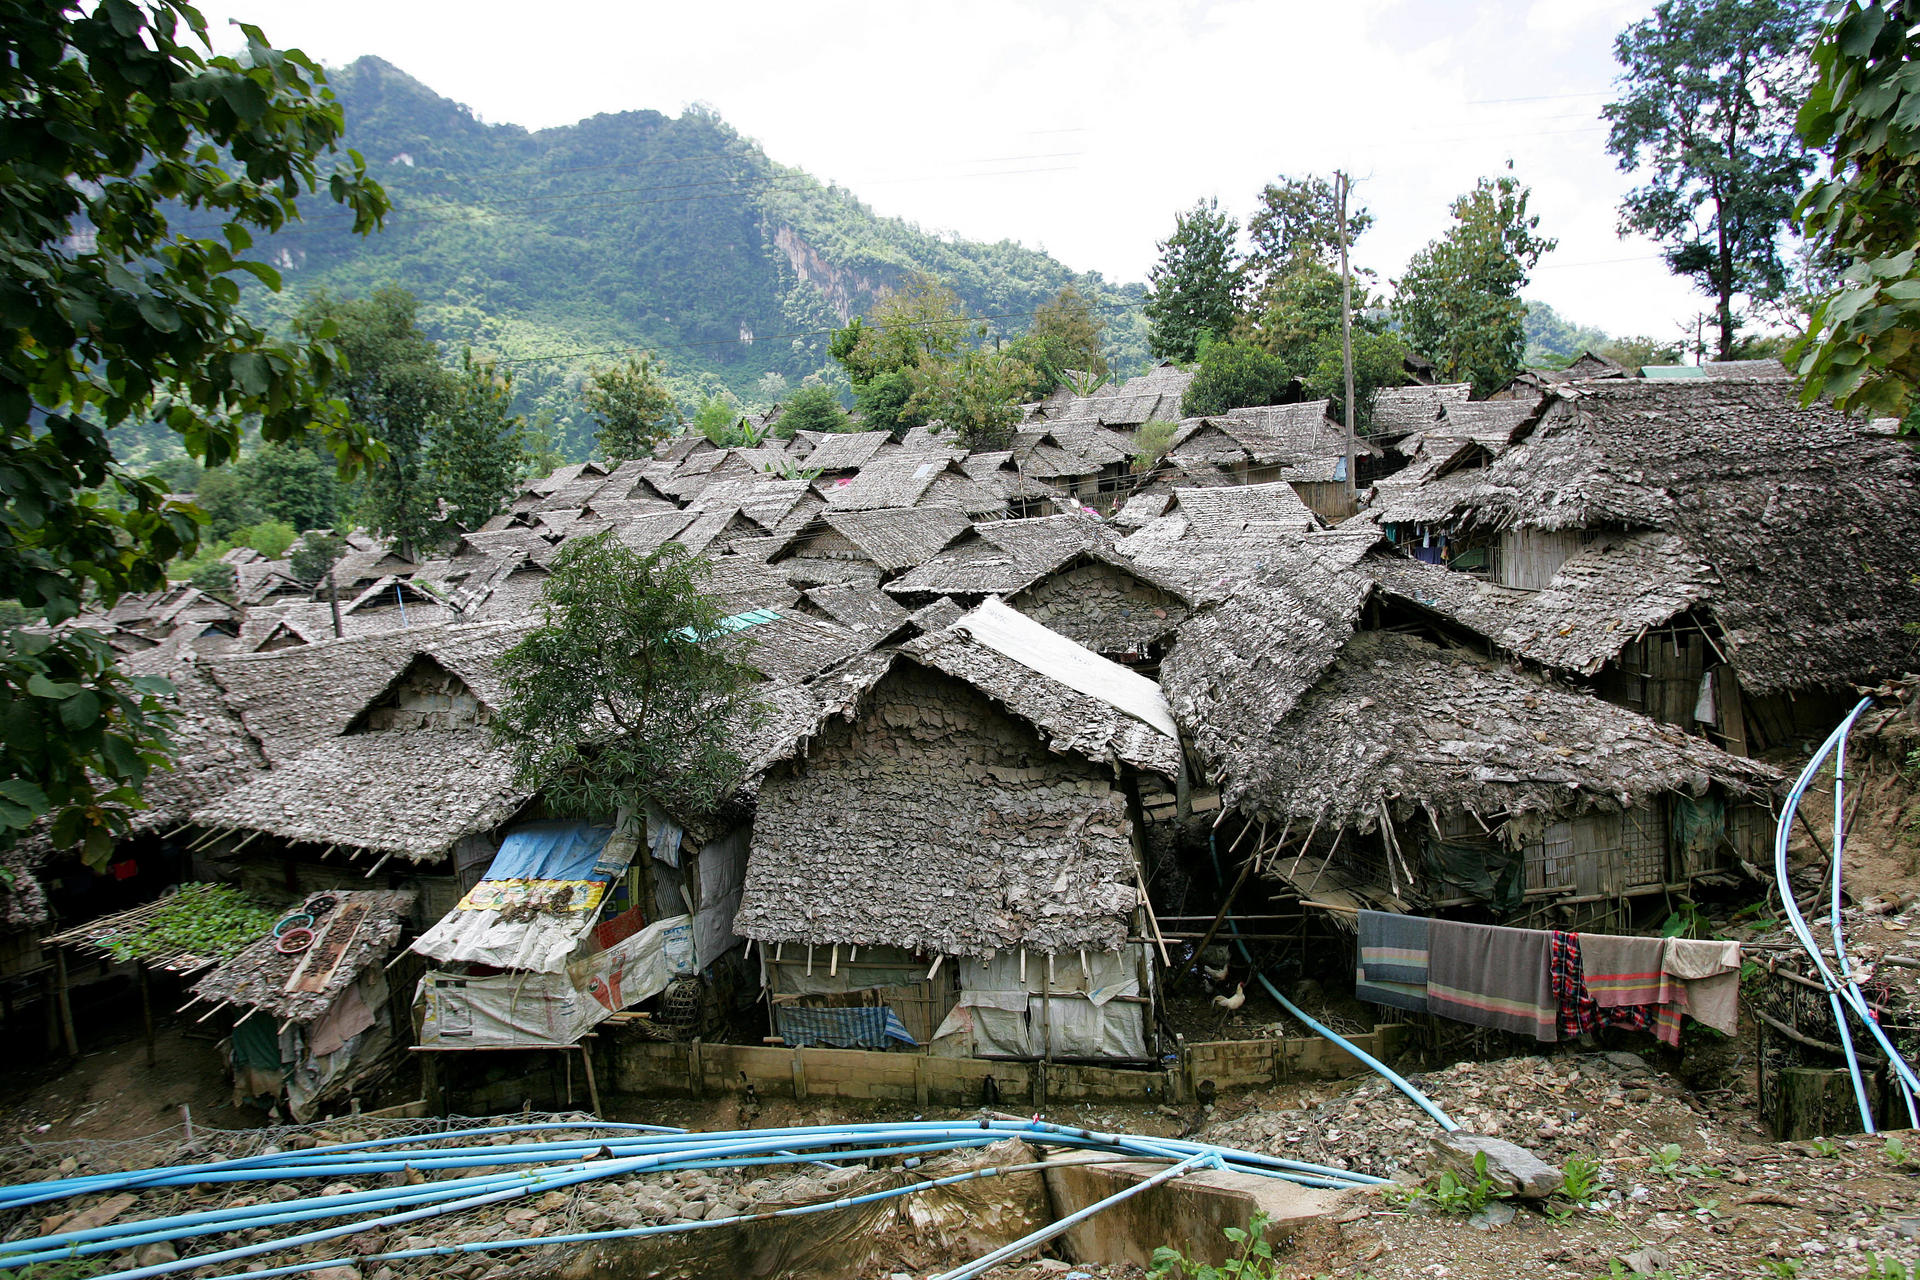 The Mae La camp near the Myanmar border which houses around 40,000 people. Photo: Andrew Chant